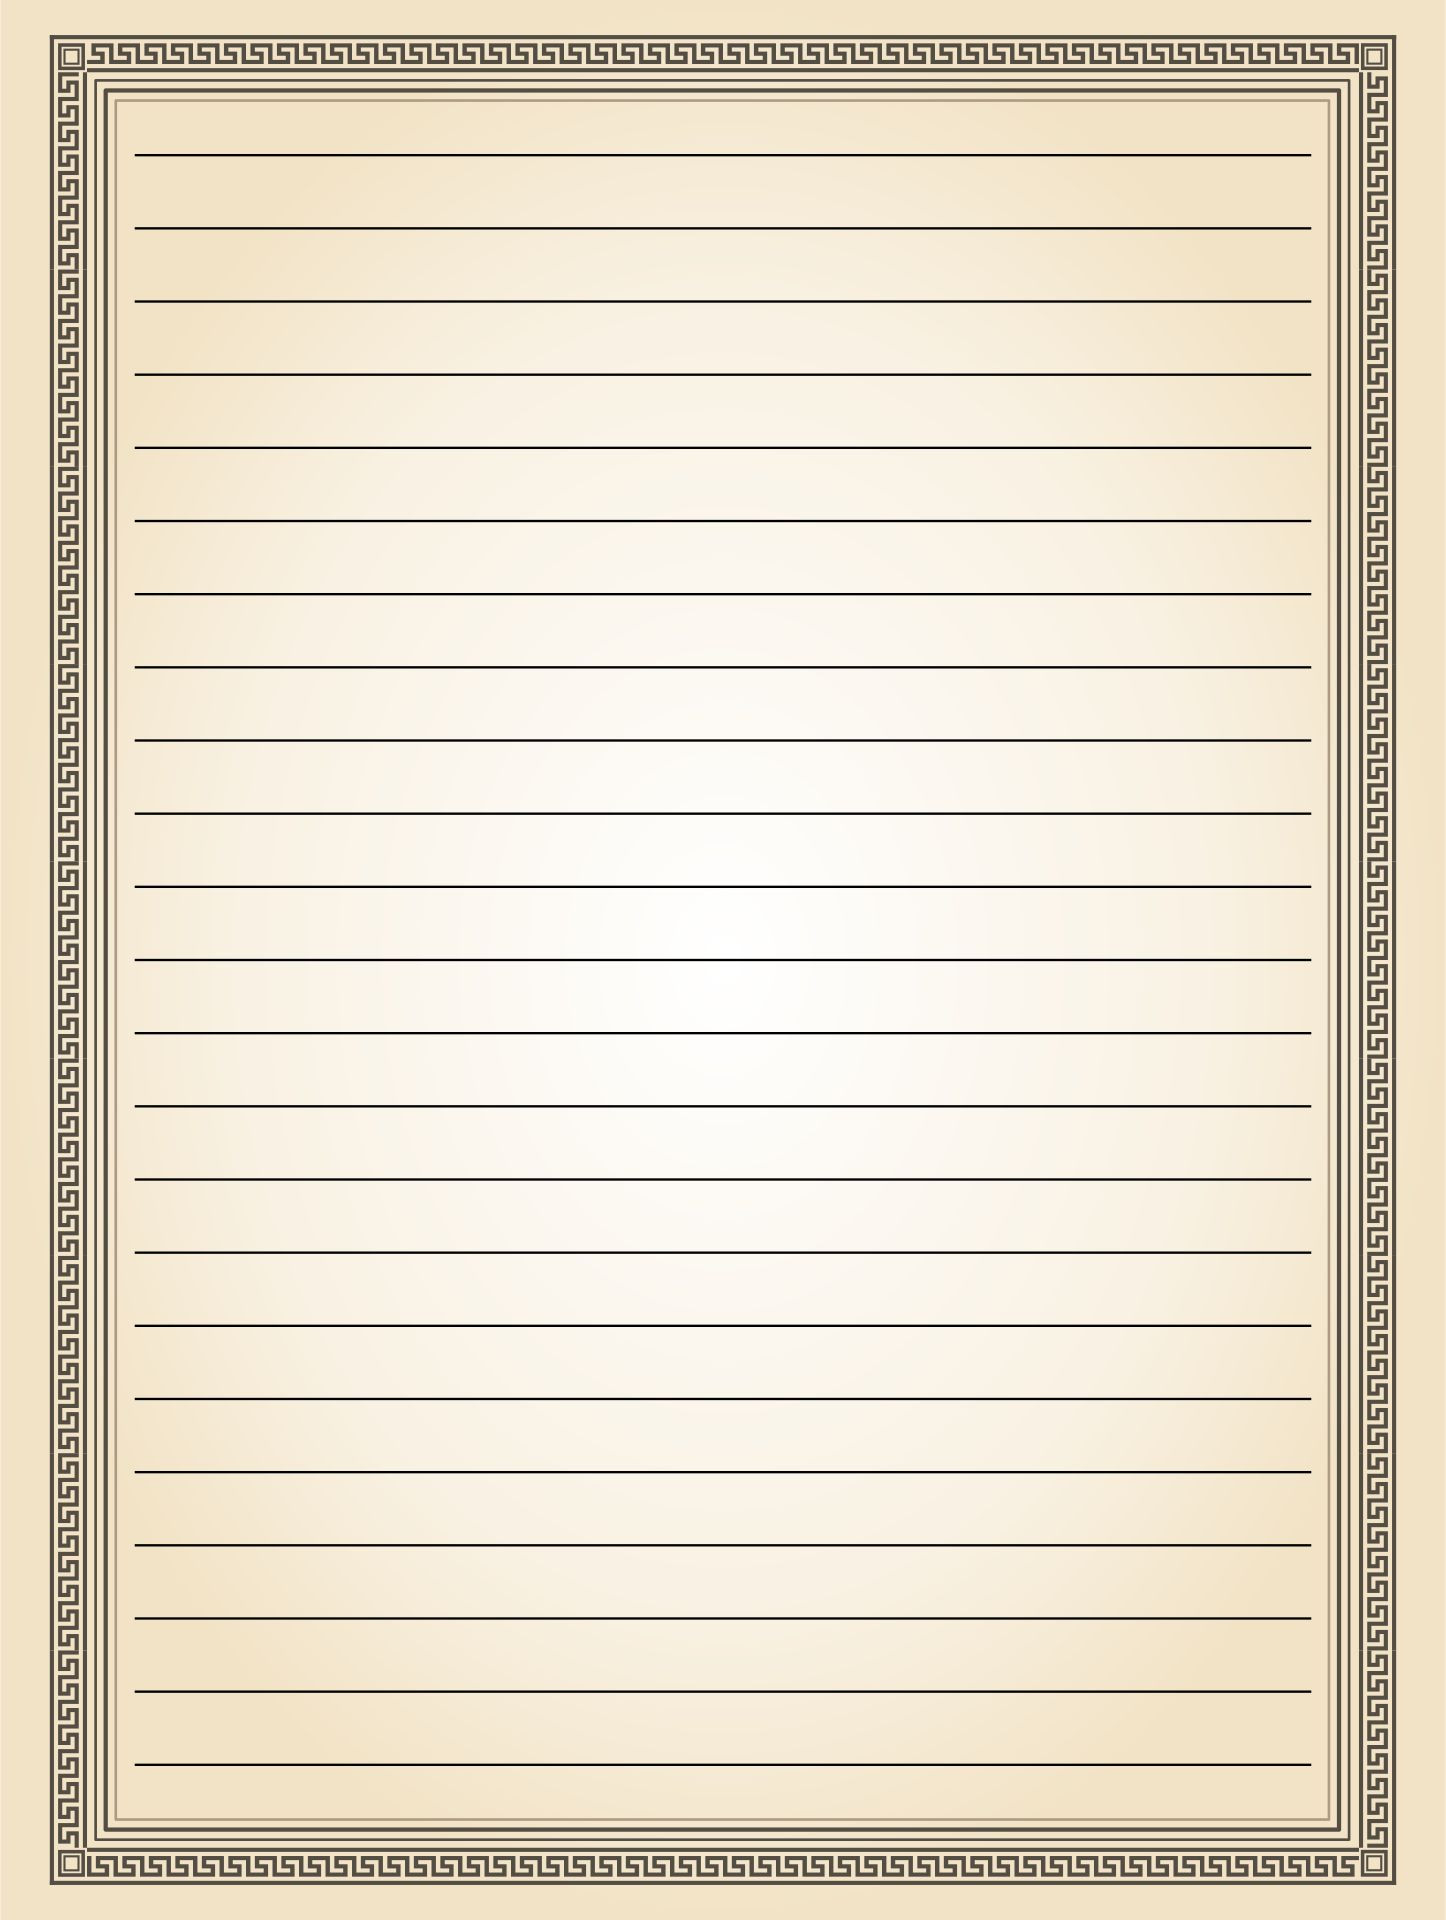 Free Printable Lined Paper With Decorative Borders Primary Letter Writing Paper Printable